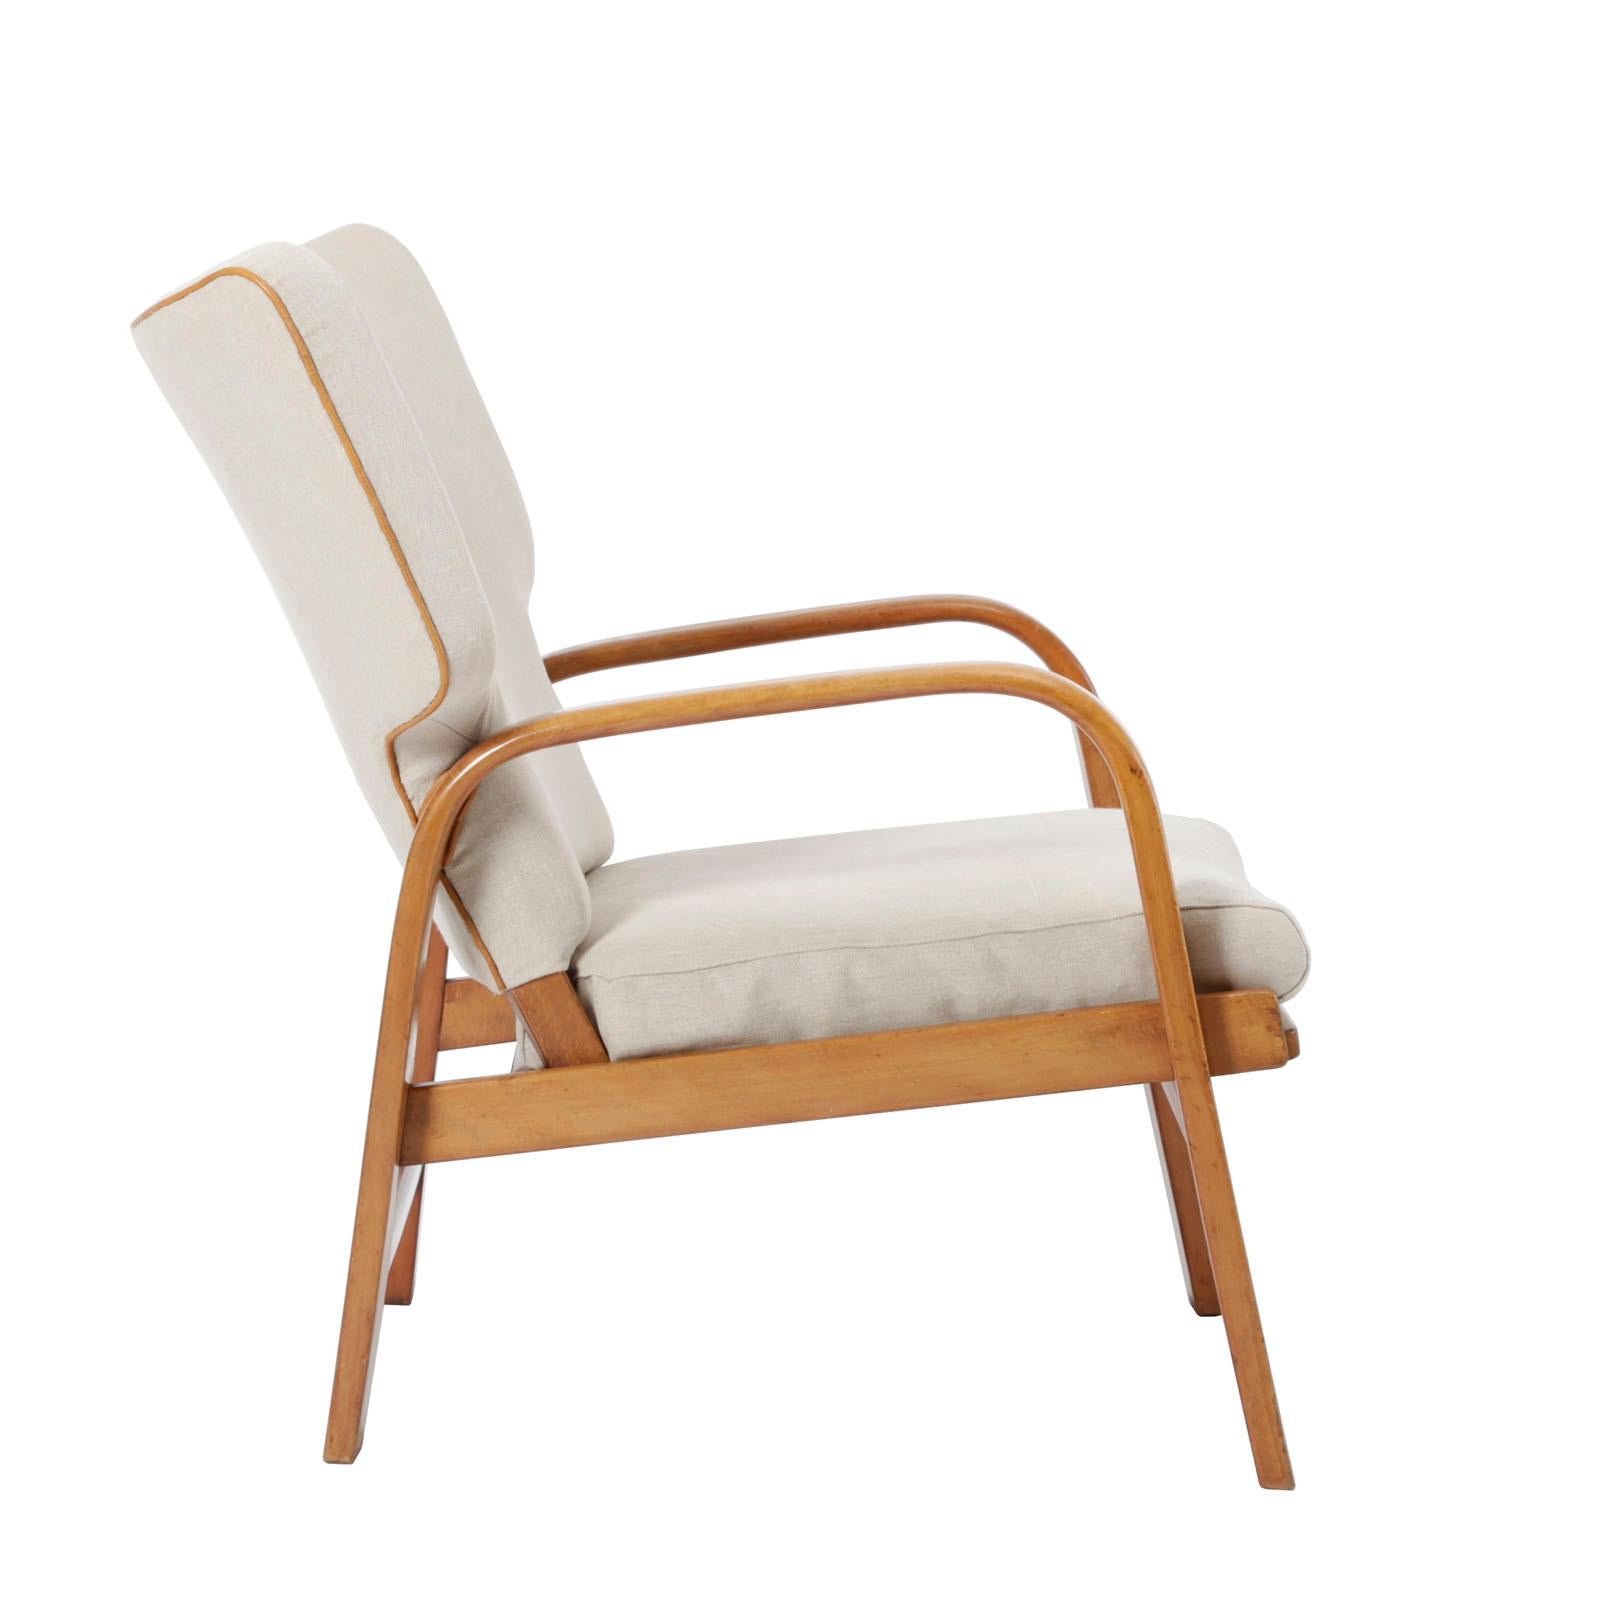 An easy chair with a beech frame and a broad back upholstered in linen canvas with buttons and piping in natural leather
Designed by Magnus Stephensen in 1932. Made by Fritz Hansen, Denmark
Two chairs available.